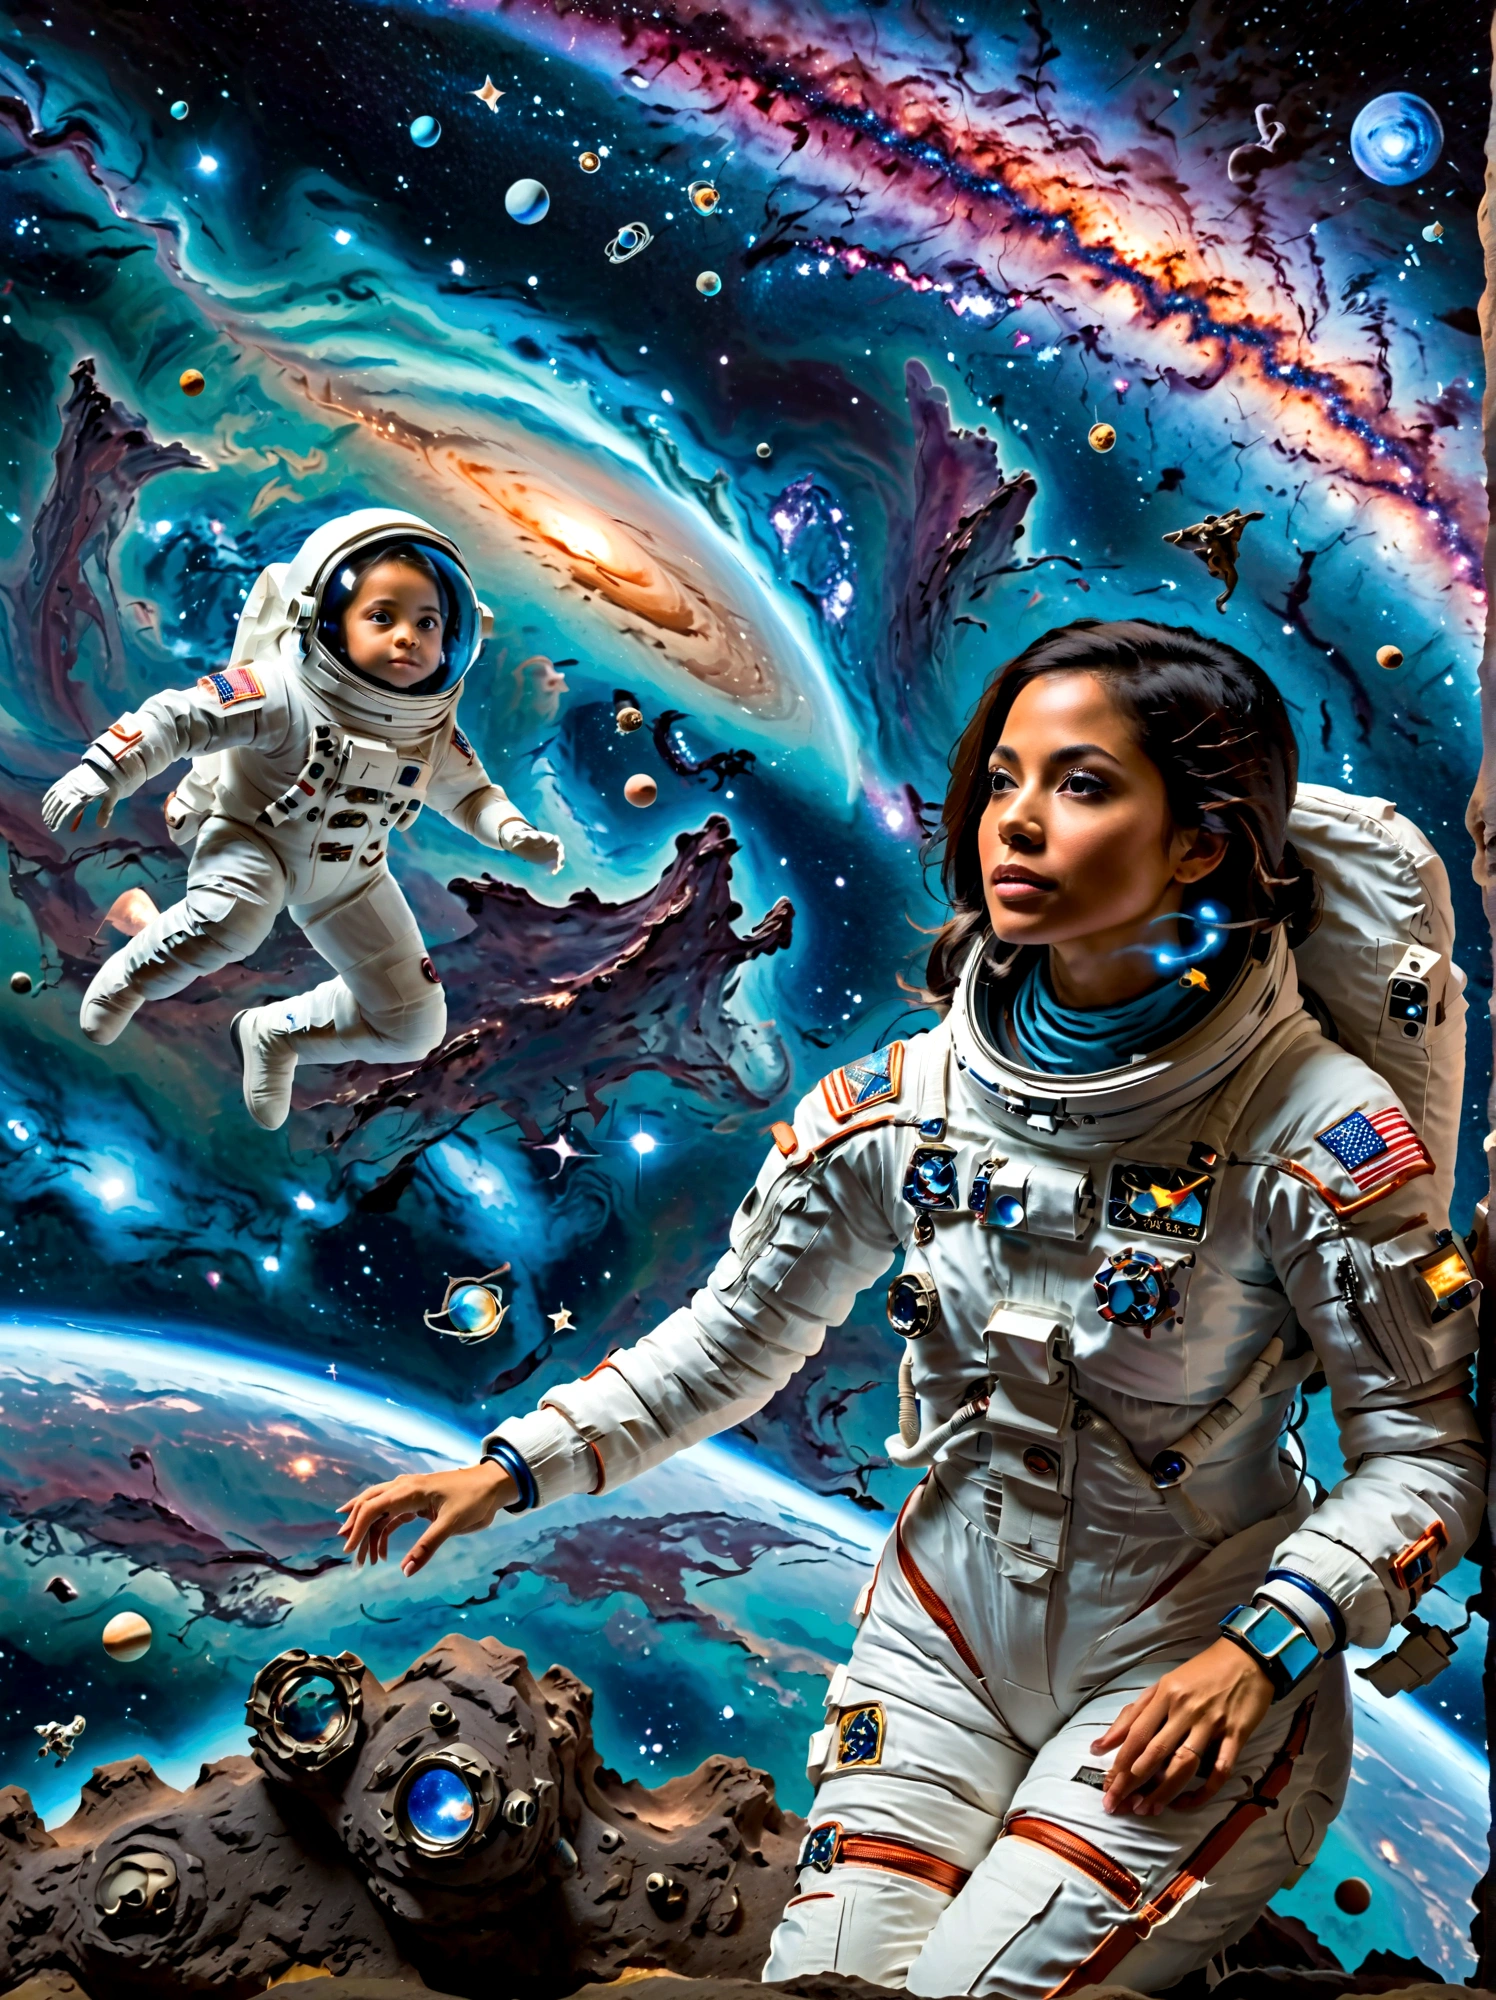 Visualize a scenario in the vast expanse of space. In the foreground, there's a Hispanic female astronaut, completely suited up in a detailed spacesuit, elegantly floating in zero gravity. She's gazing at an alien creature, who's also hovering nearby. The alien is fascinating with multiple appendages, shiny azure skin, large eyes that shimmer in the starlight, and emits a soft bioluminescent glow. The backdrop is filled with millions of stars, the dark void of space, and a giant swirling galaxy. Both beings, despite their differences, seem to communicate in peaceful harmony.